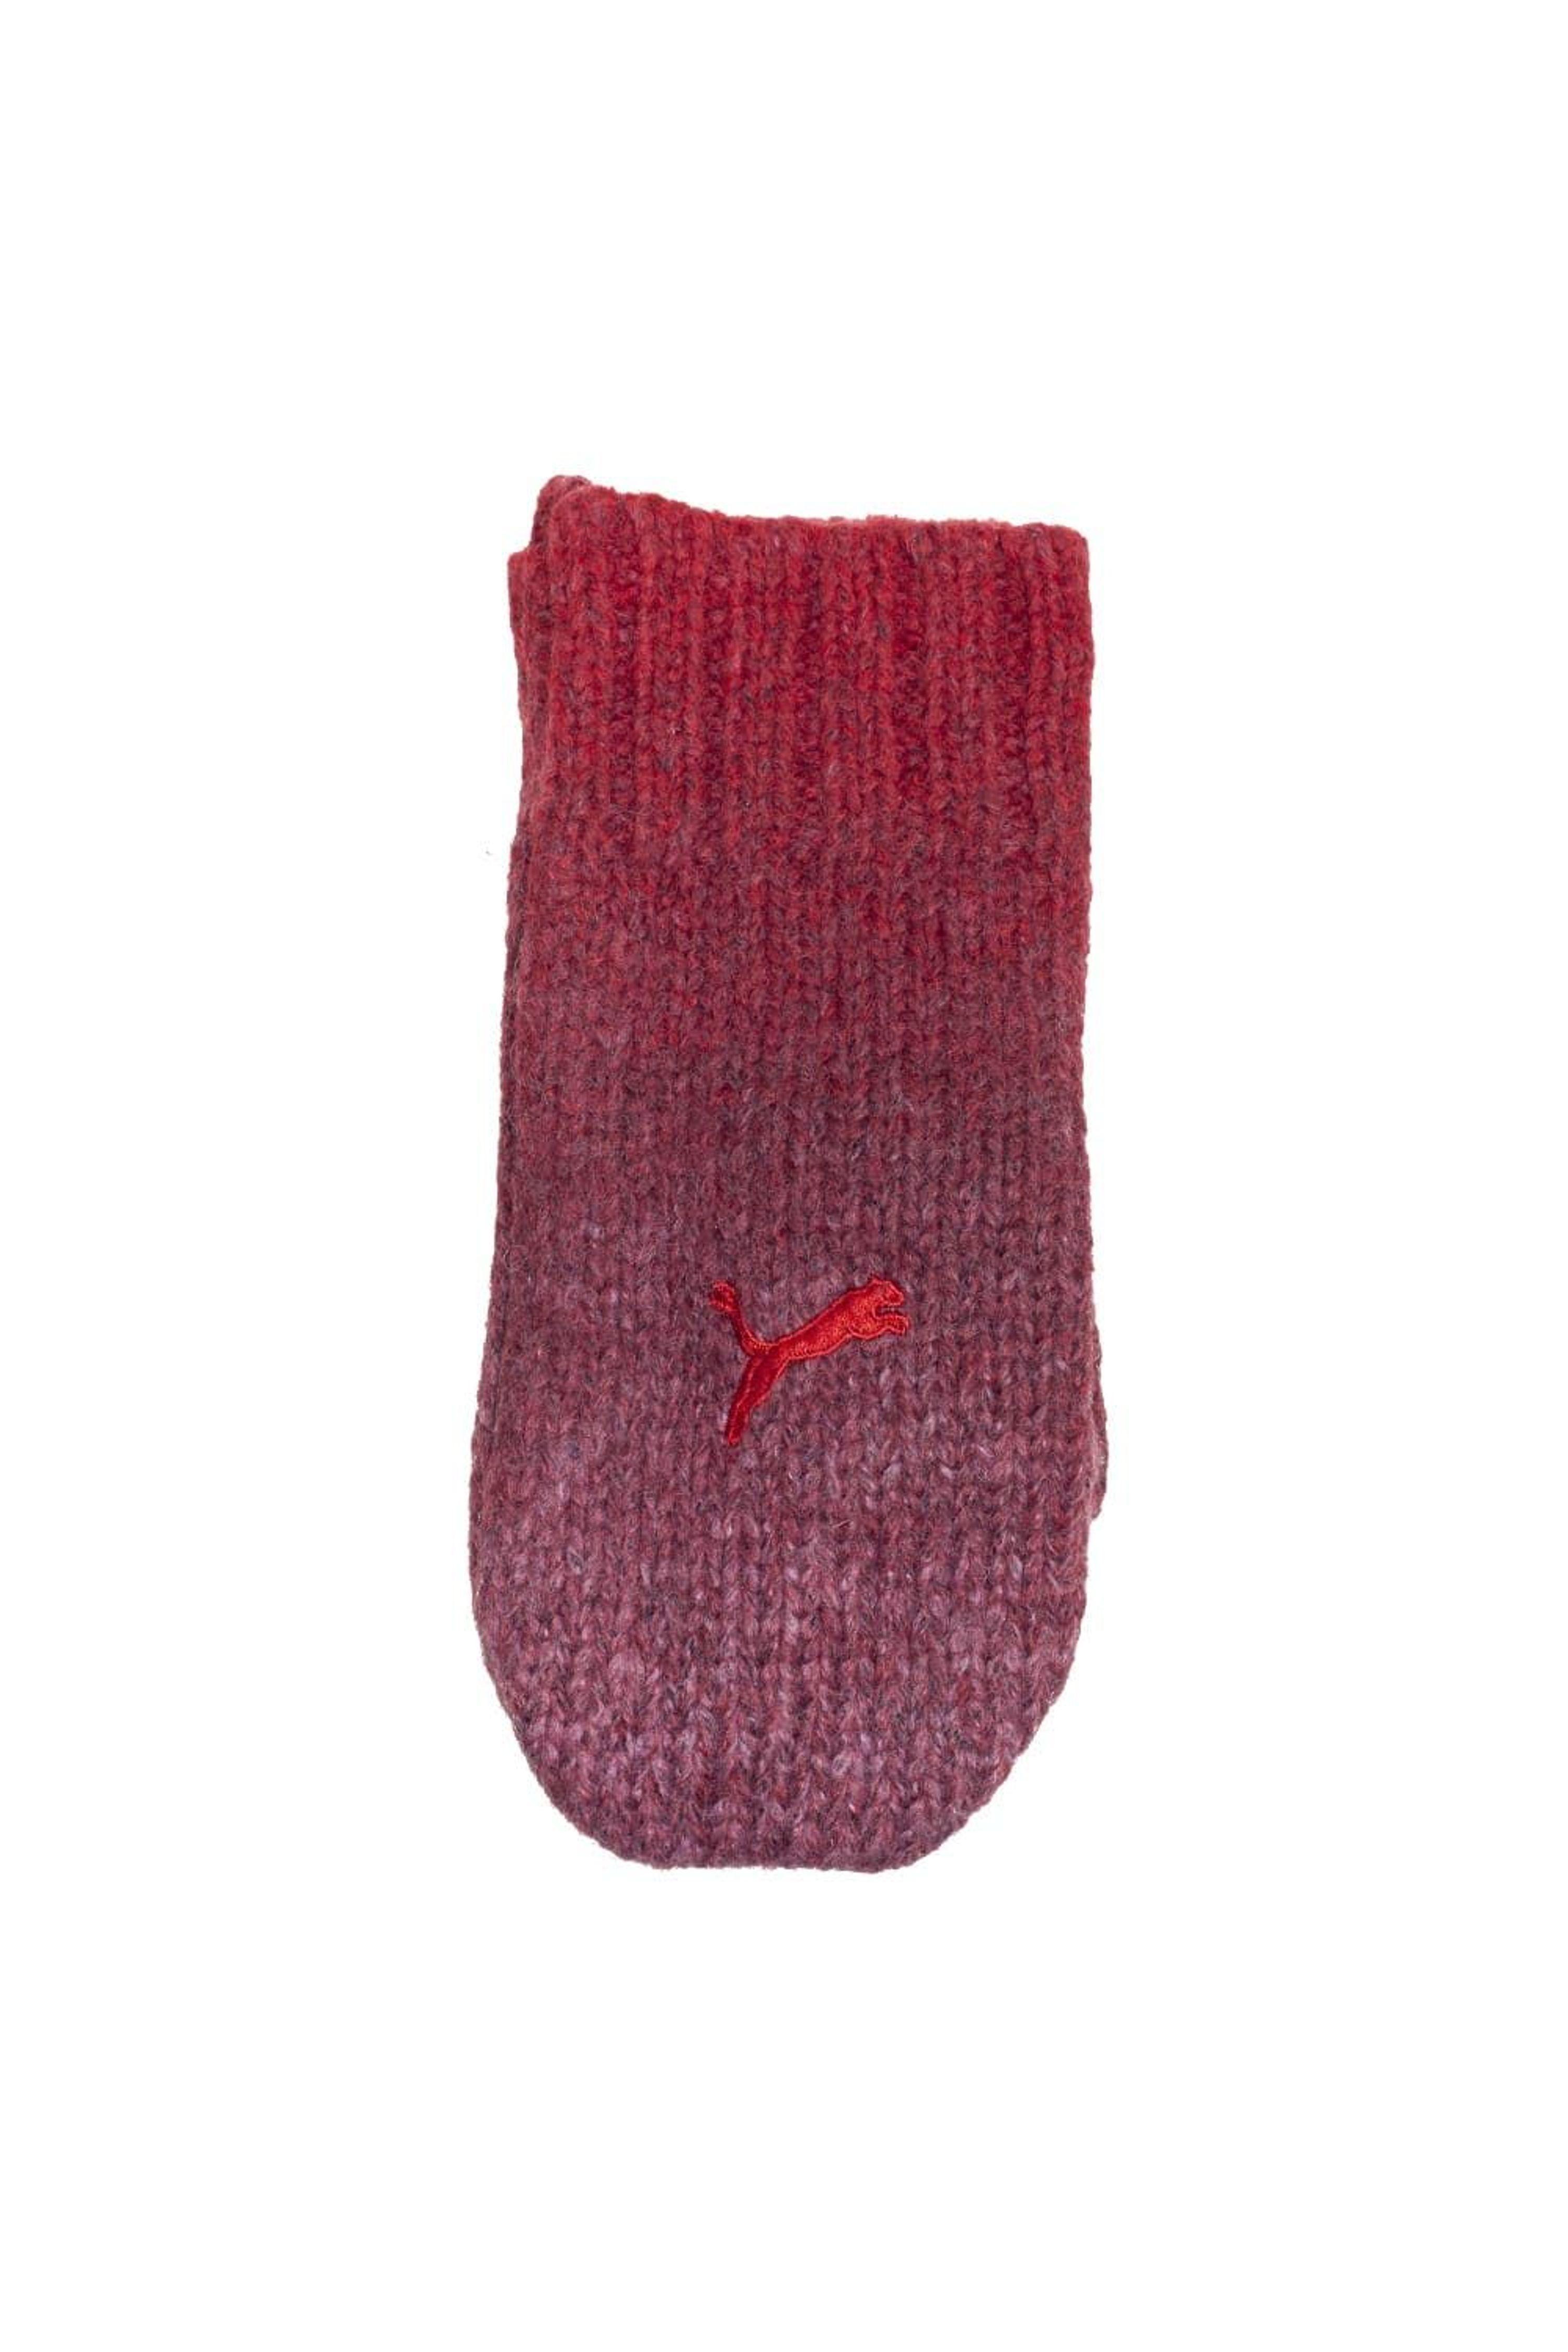 PUMA Sport Lifestyle Mittens in Red | Lyst